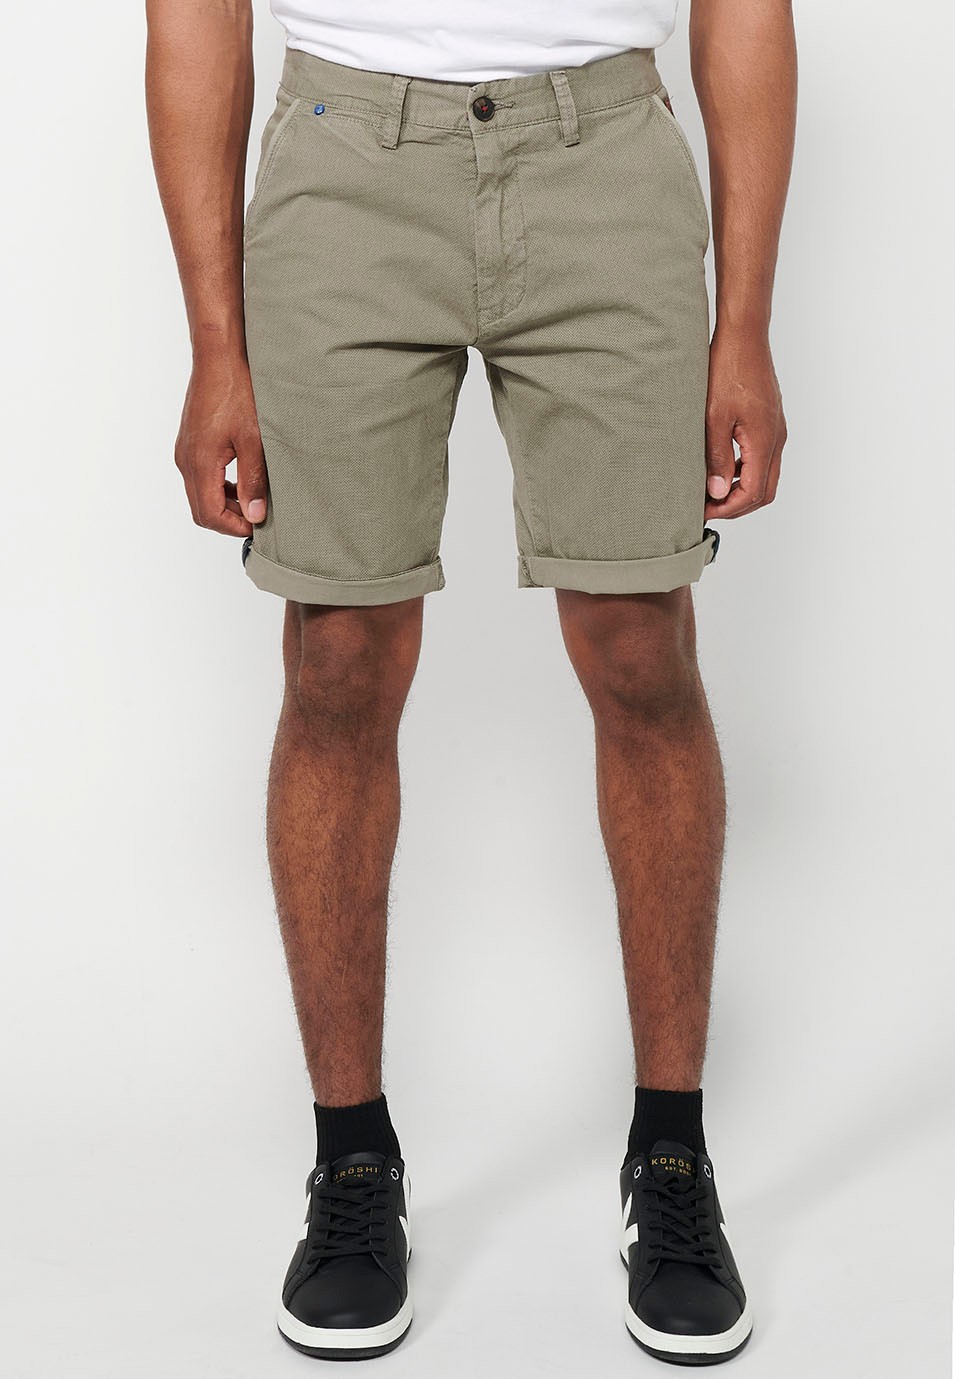 Men's Bermuda Chino Shorts with Turn-Up Finish with Front Zipper and Button Closure with Four Pockets in Mink Color 4